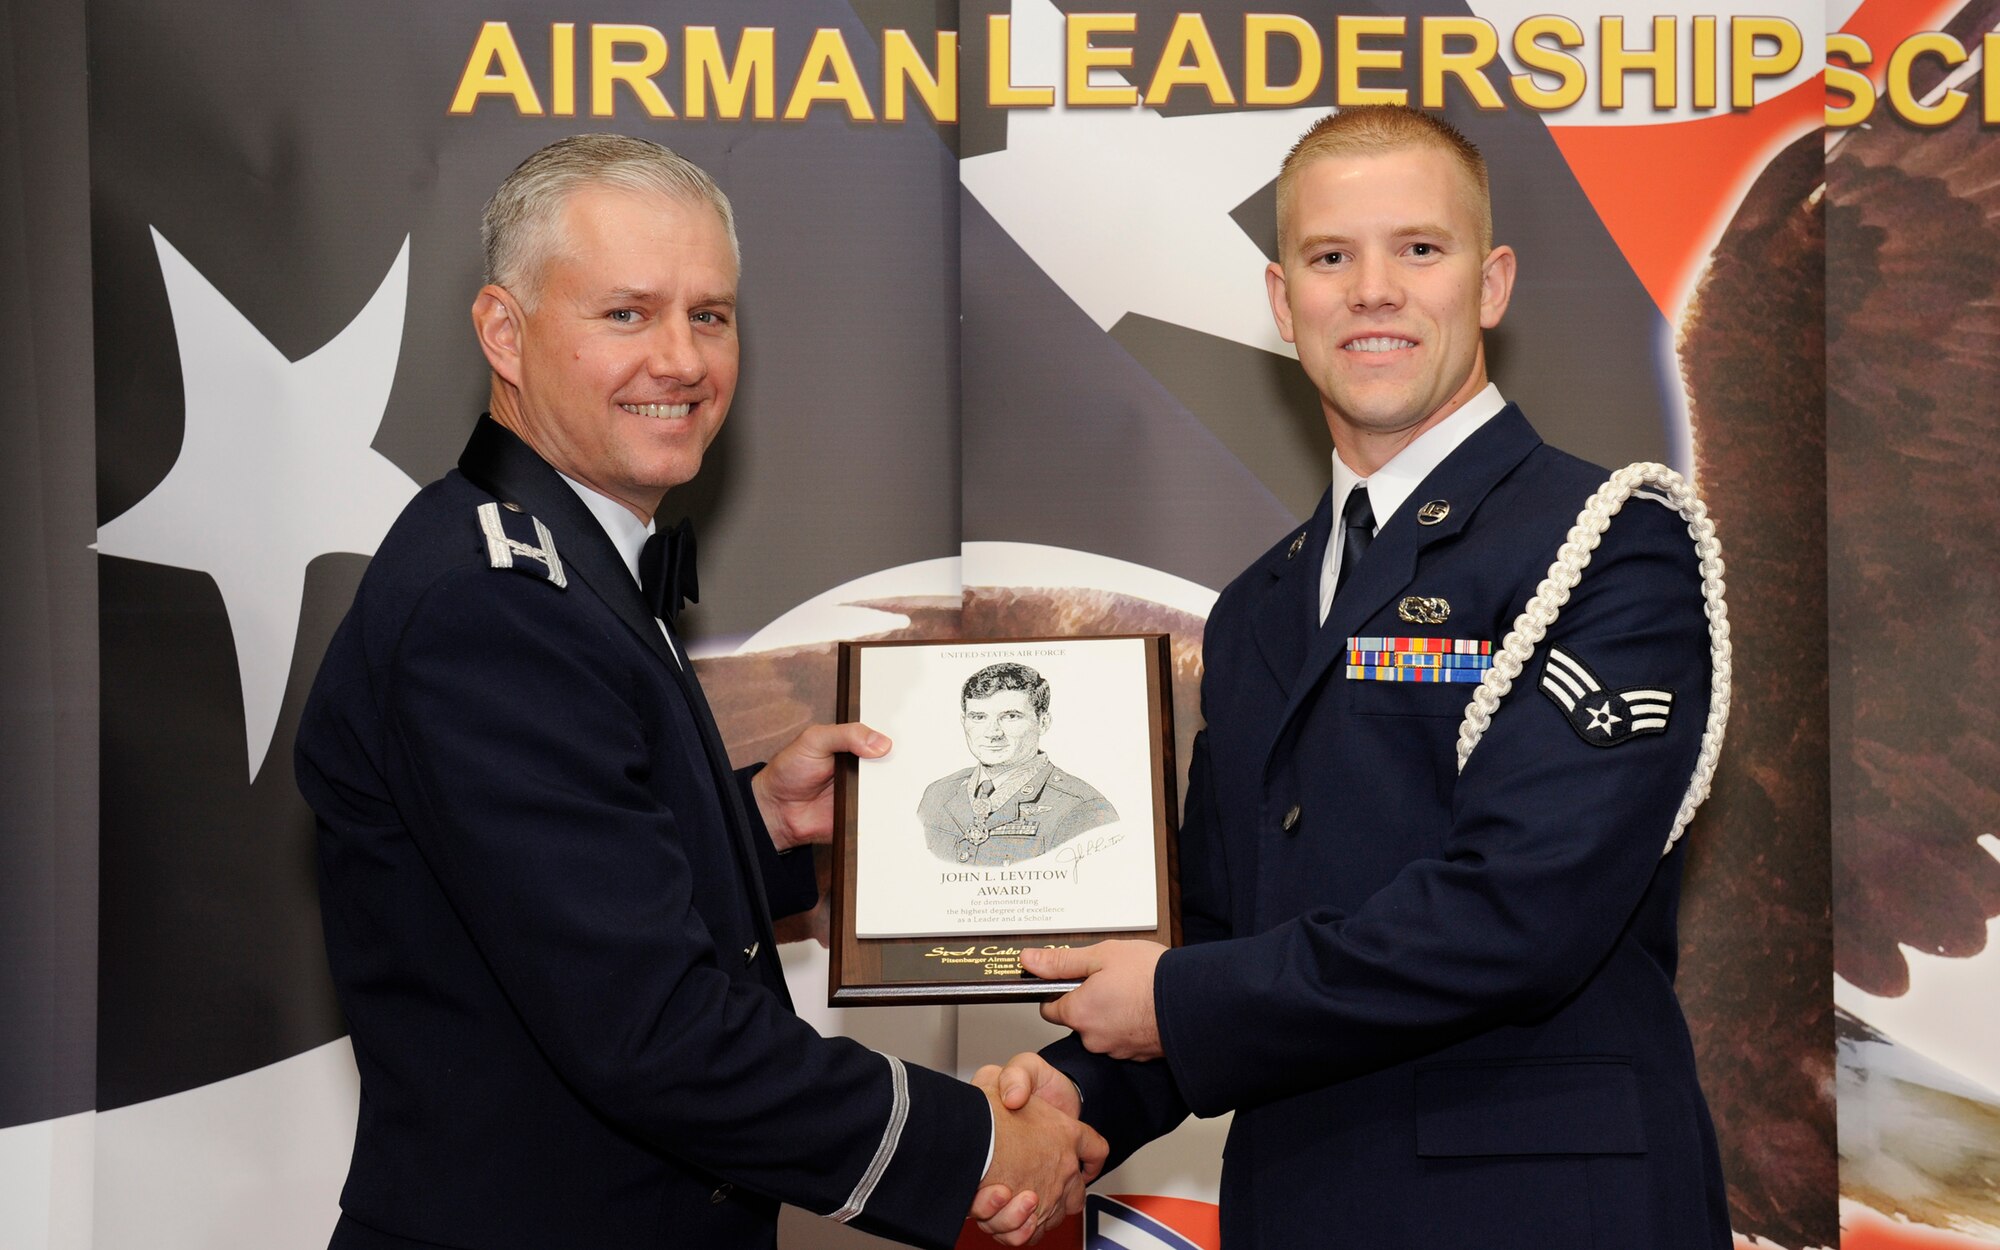 SPANGDAHLEM AIR BASE, Germany – Col. Kevin Anderson, 52nd Fighter Wing vice commander, presents the John L. Levitow Award to Senior Airman Calvin Woody, 52nd Aircraft Maintenance Squadron, during the Airman Leadership School class 09-8 graduation Sept. 29 at Club Eifel.  (U.S. Air Force photo/Master Sgt. Bill Gomez)